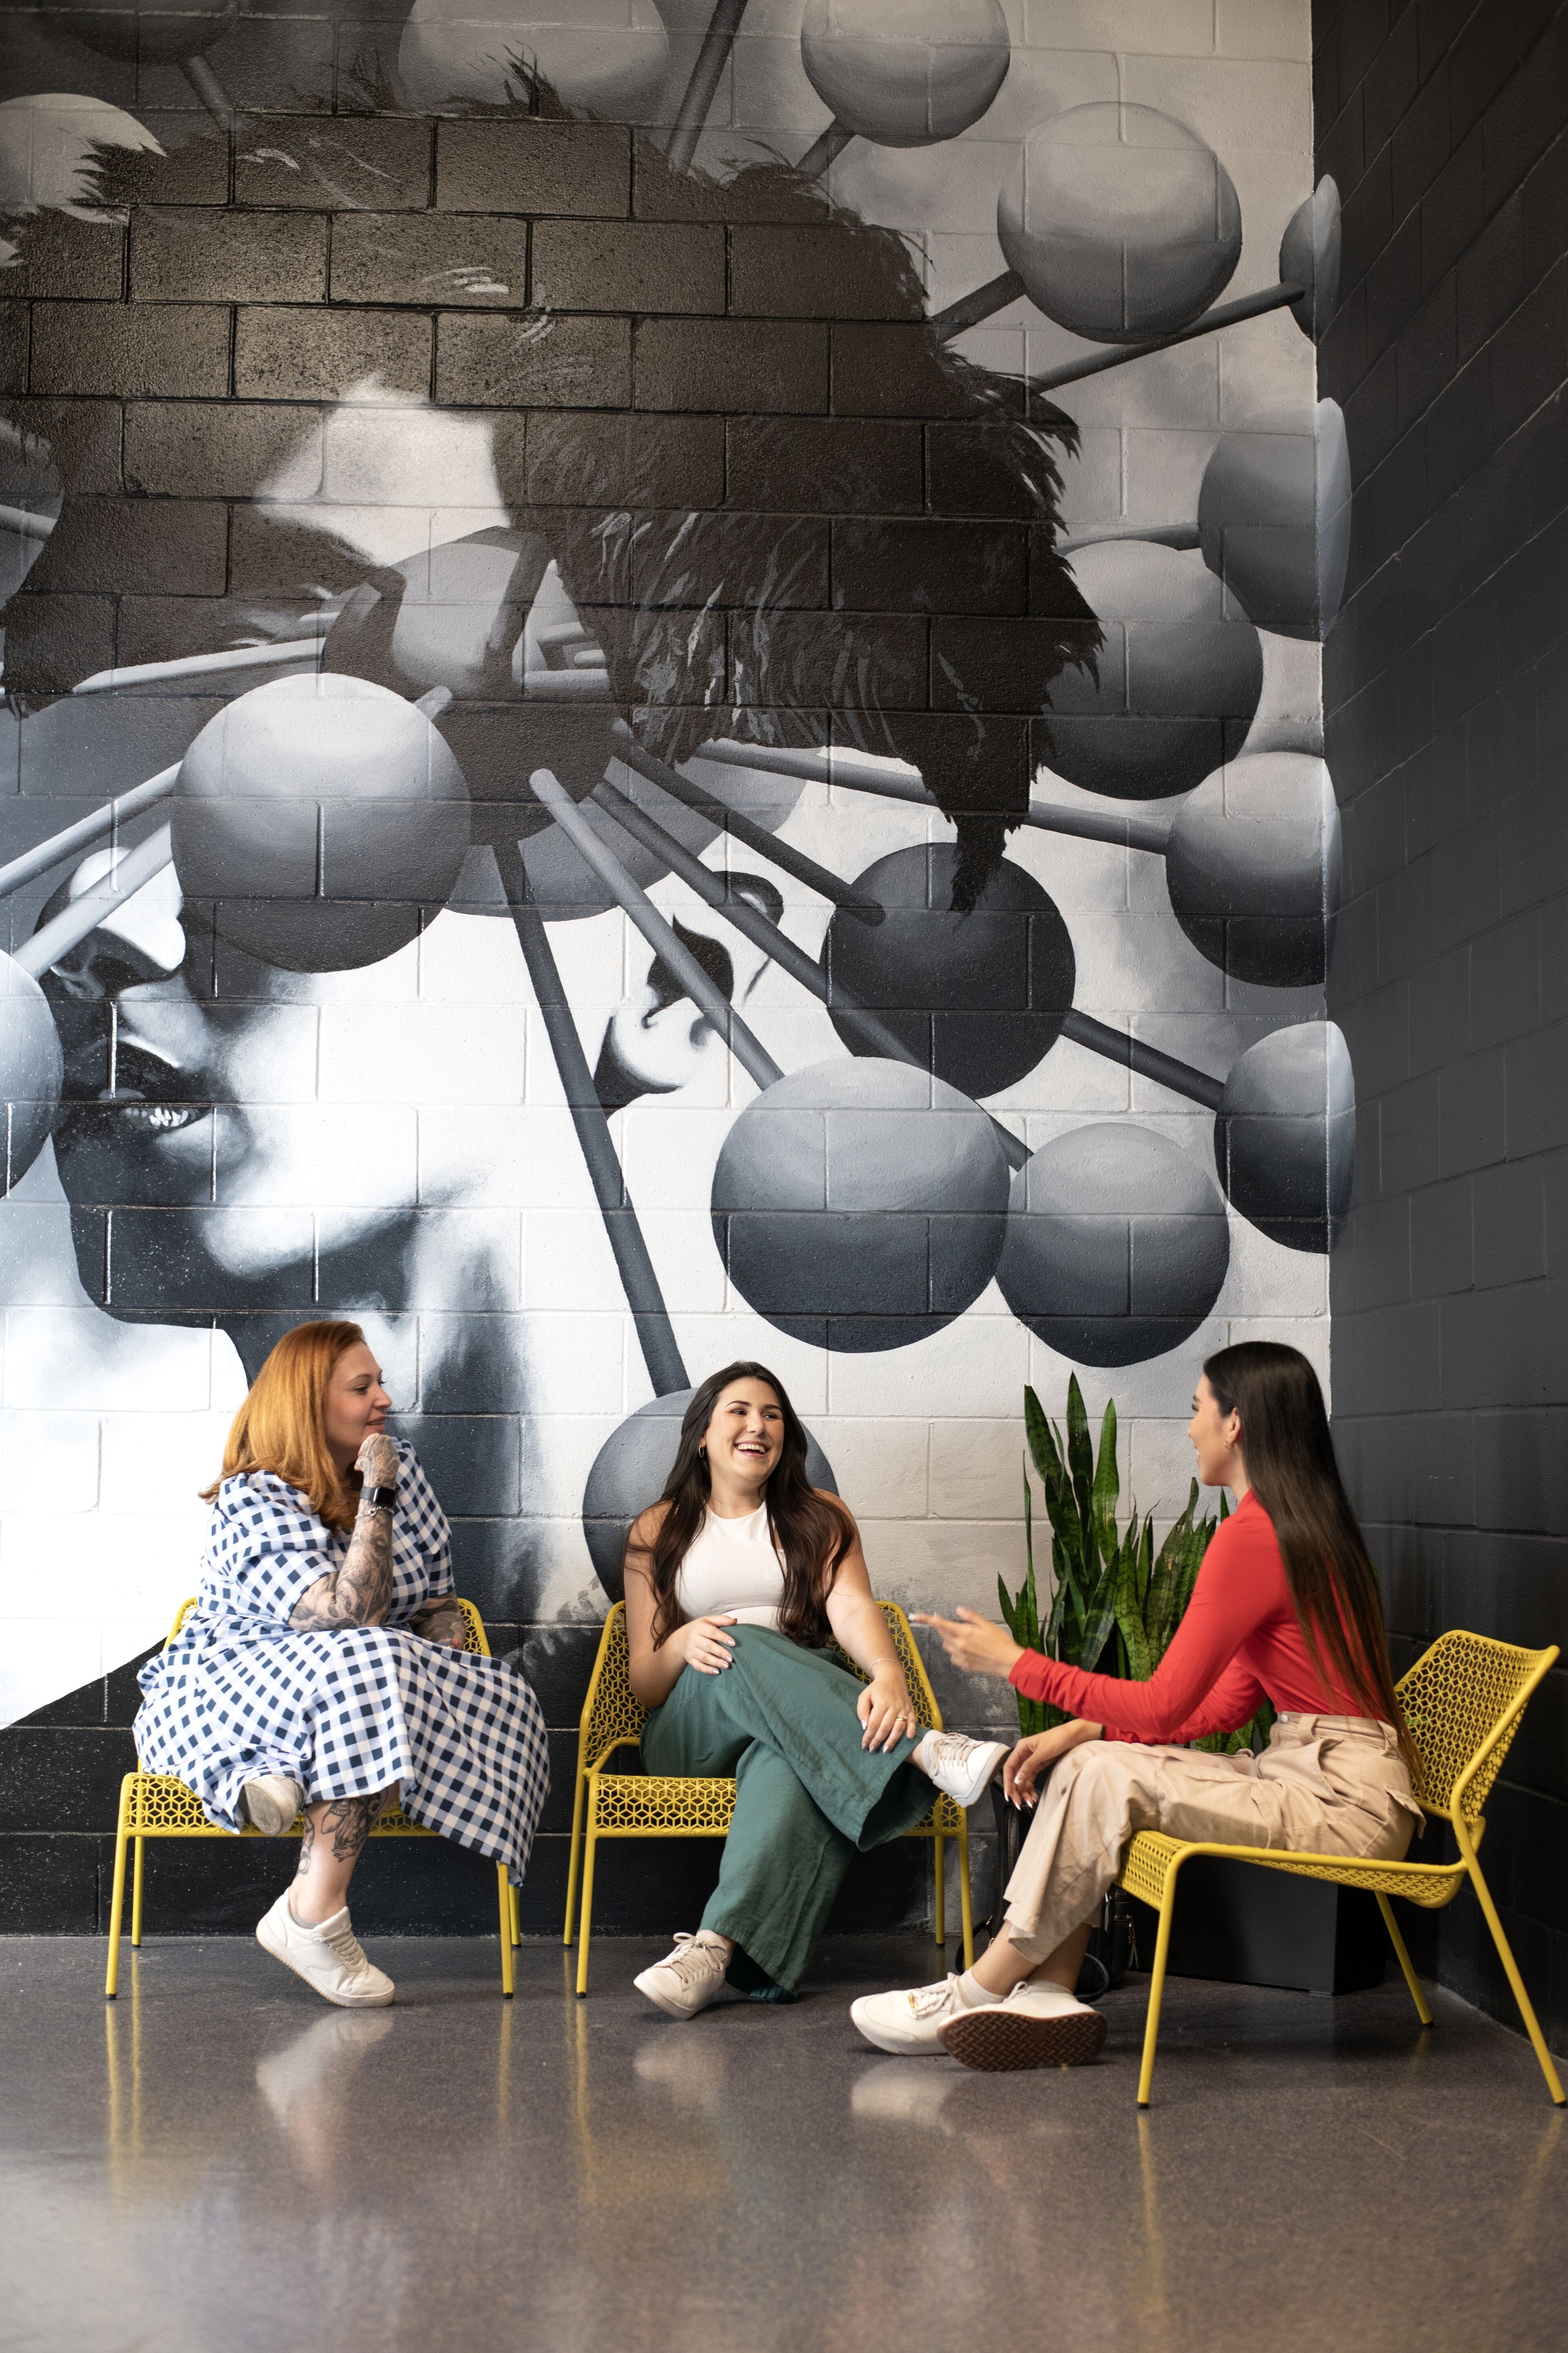 Three friends enjoy a lively discussion in a creatively inspired space with striking wall art.